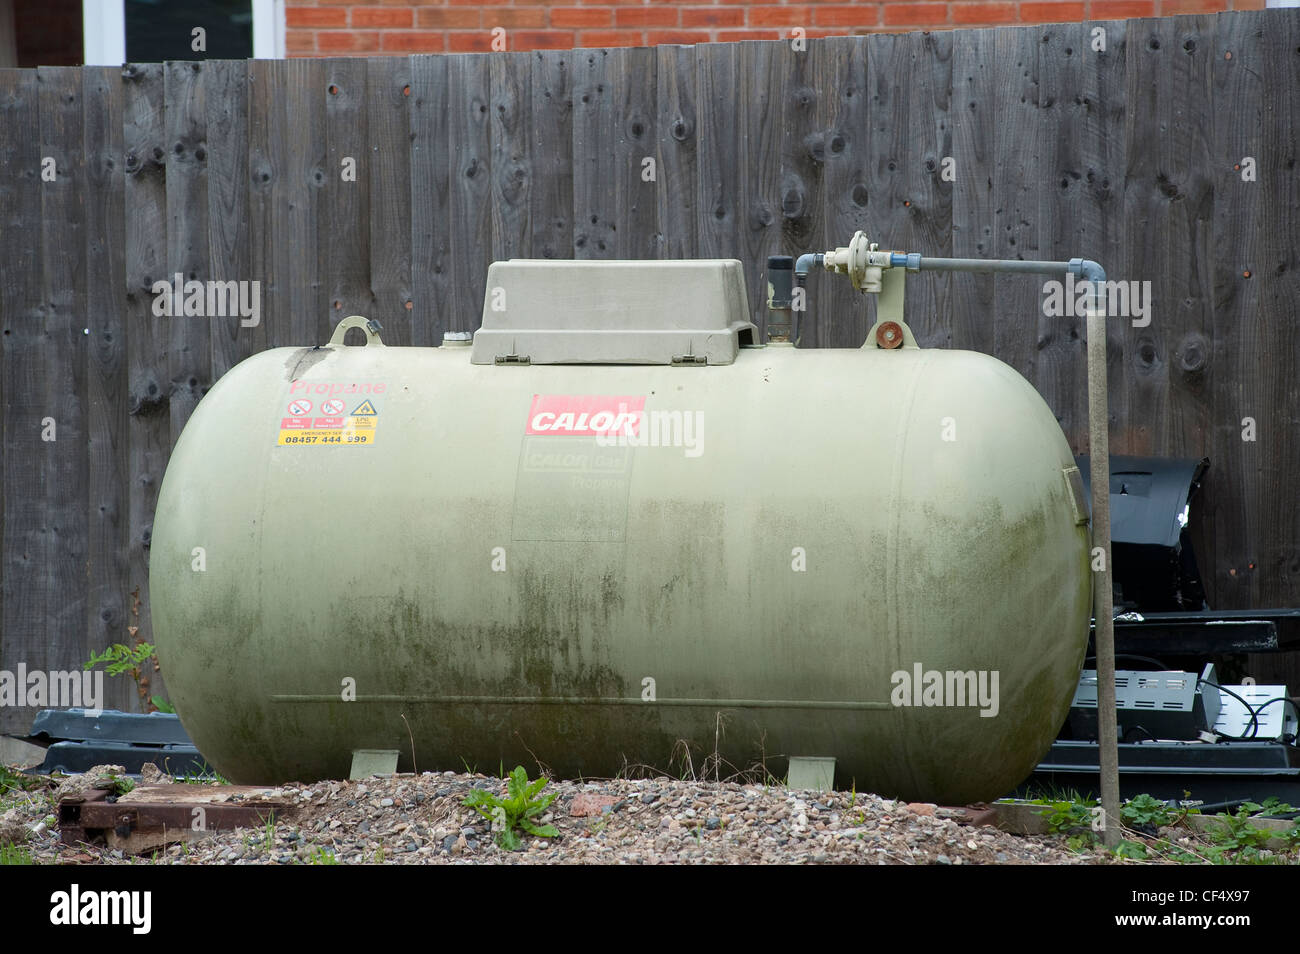 Above ground bulk tank housing LPG for domestic heating fuel in England. Stock Photo